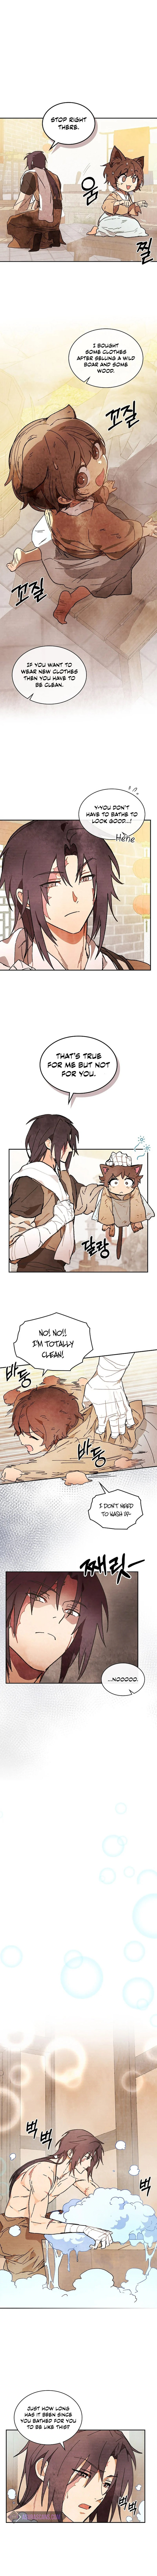 chronicles-of-the-martial-gods-return-chap-3-6